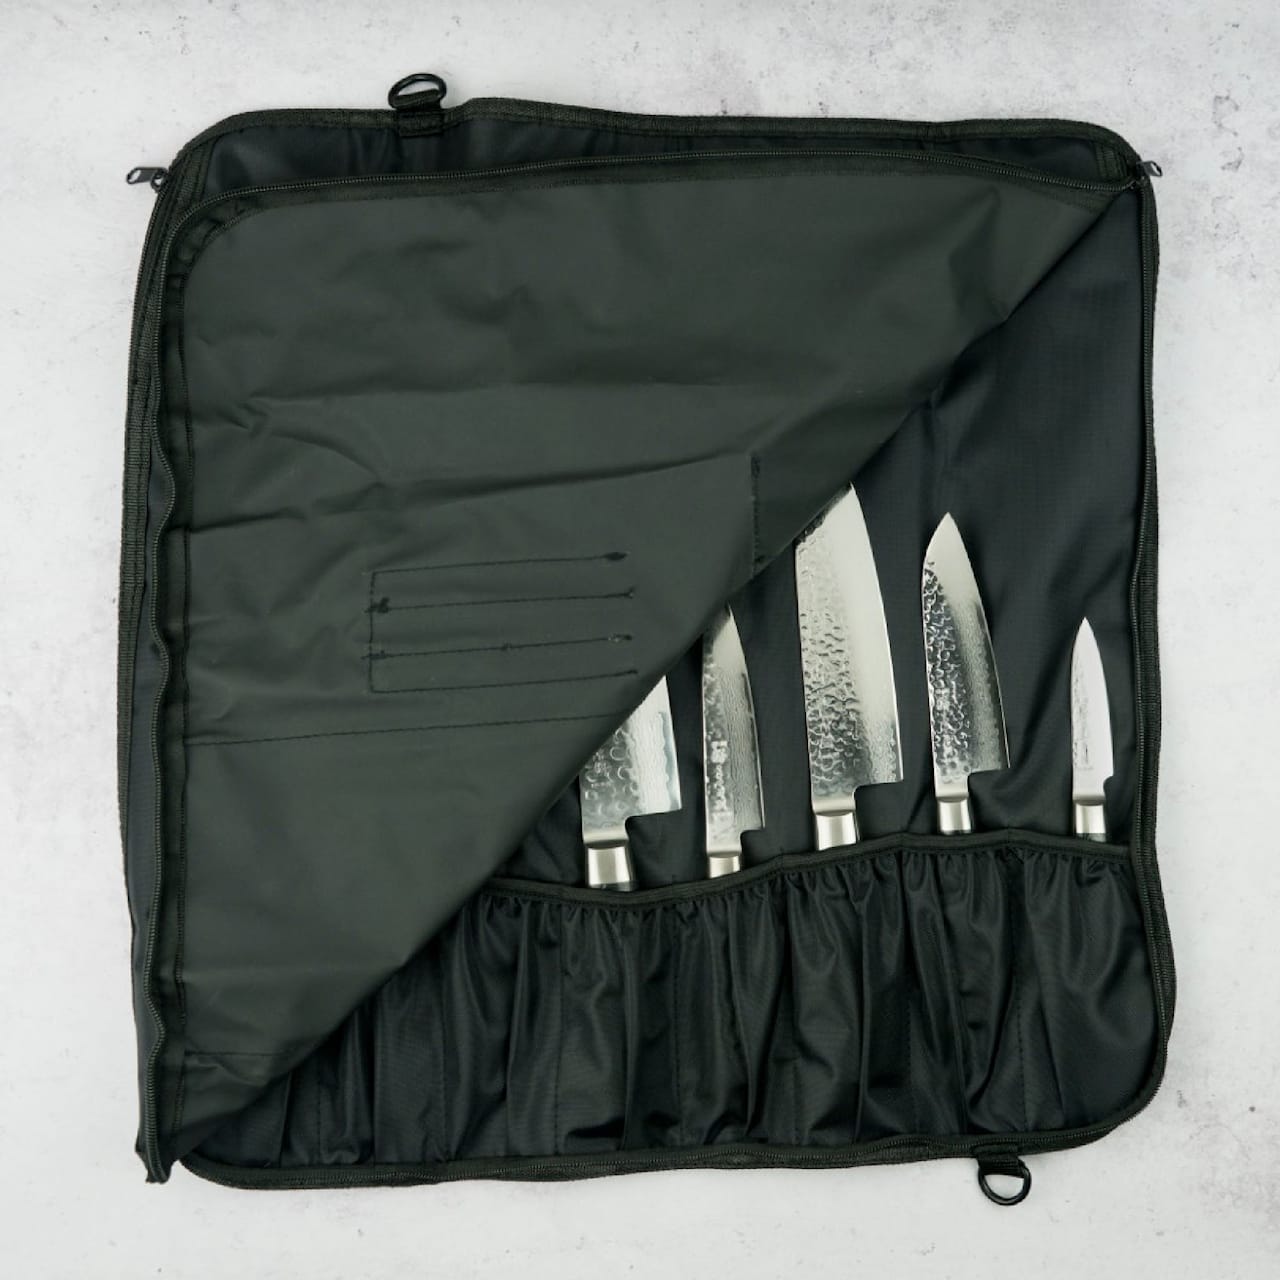 Yaxell Knife Bag For 8 Knives